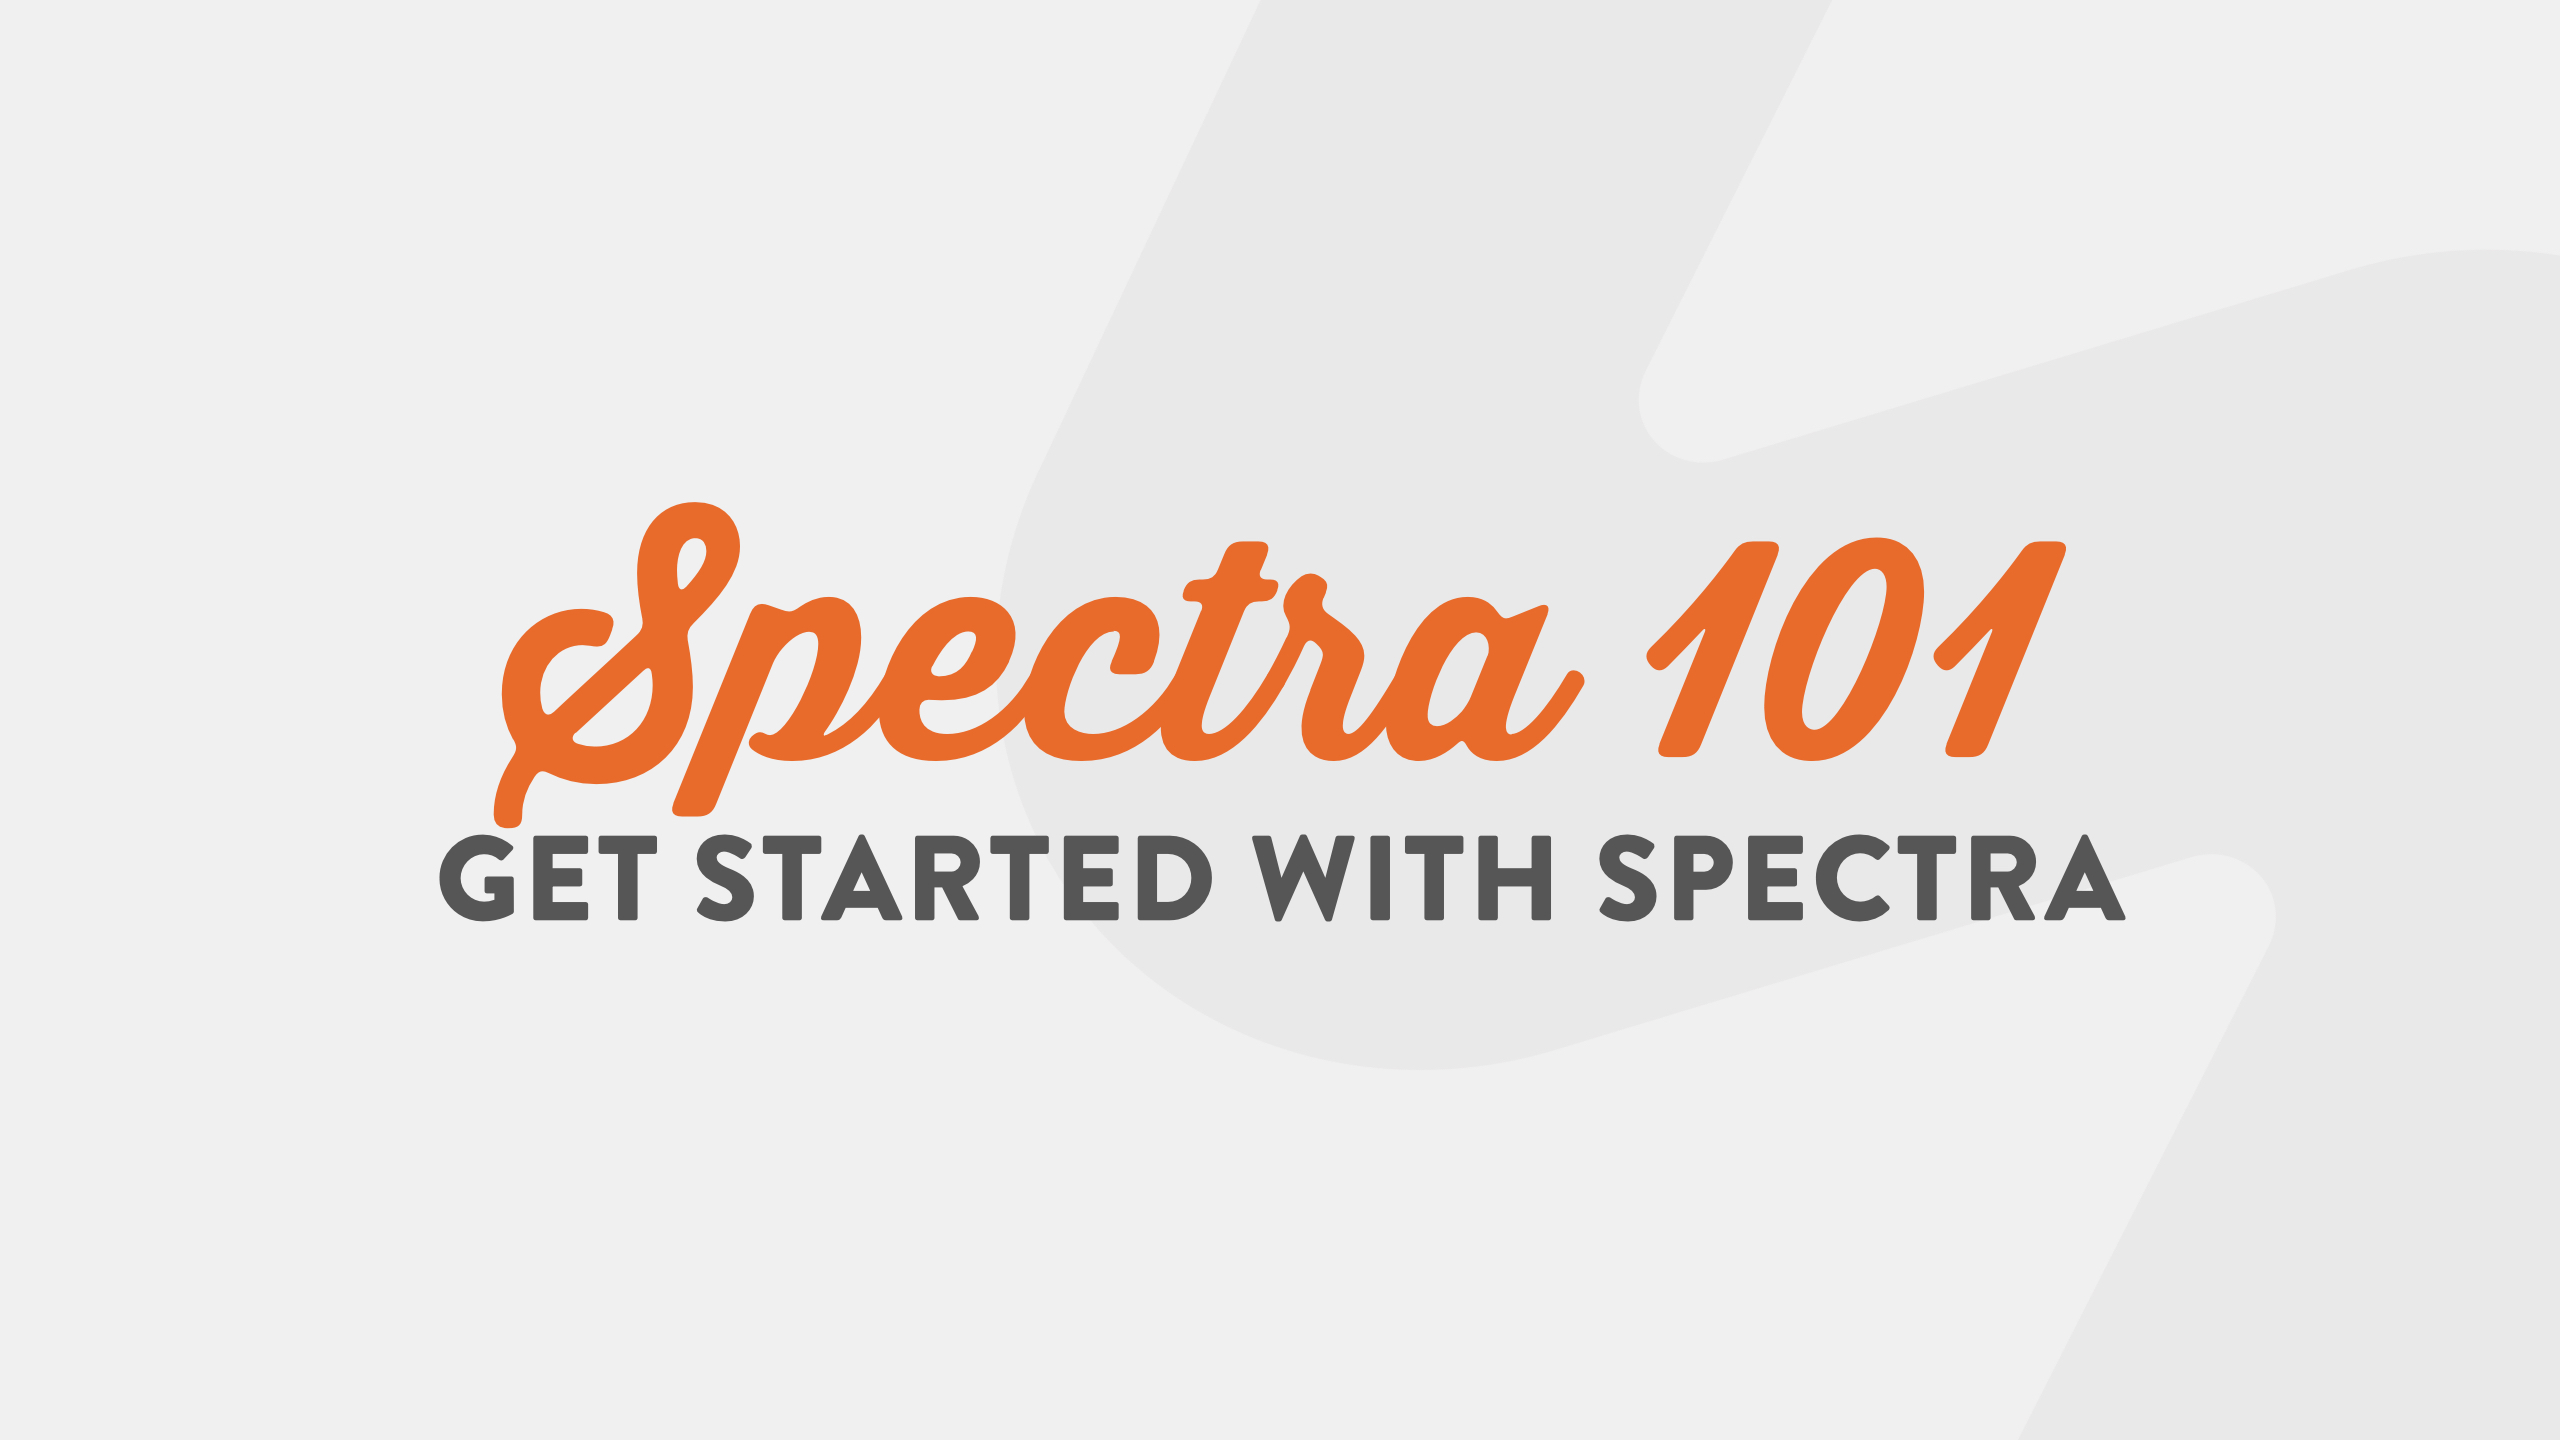 Spectra 101: Get started with Spectra on WP101®